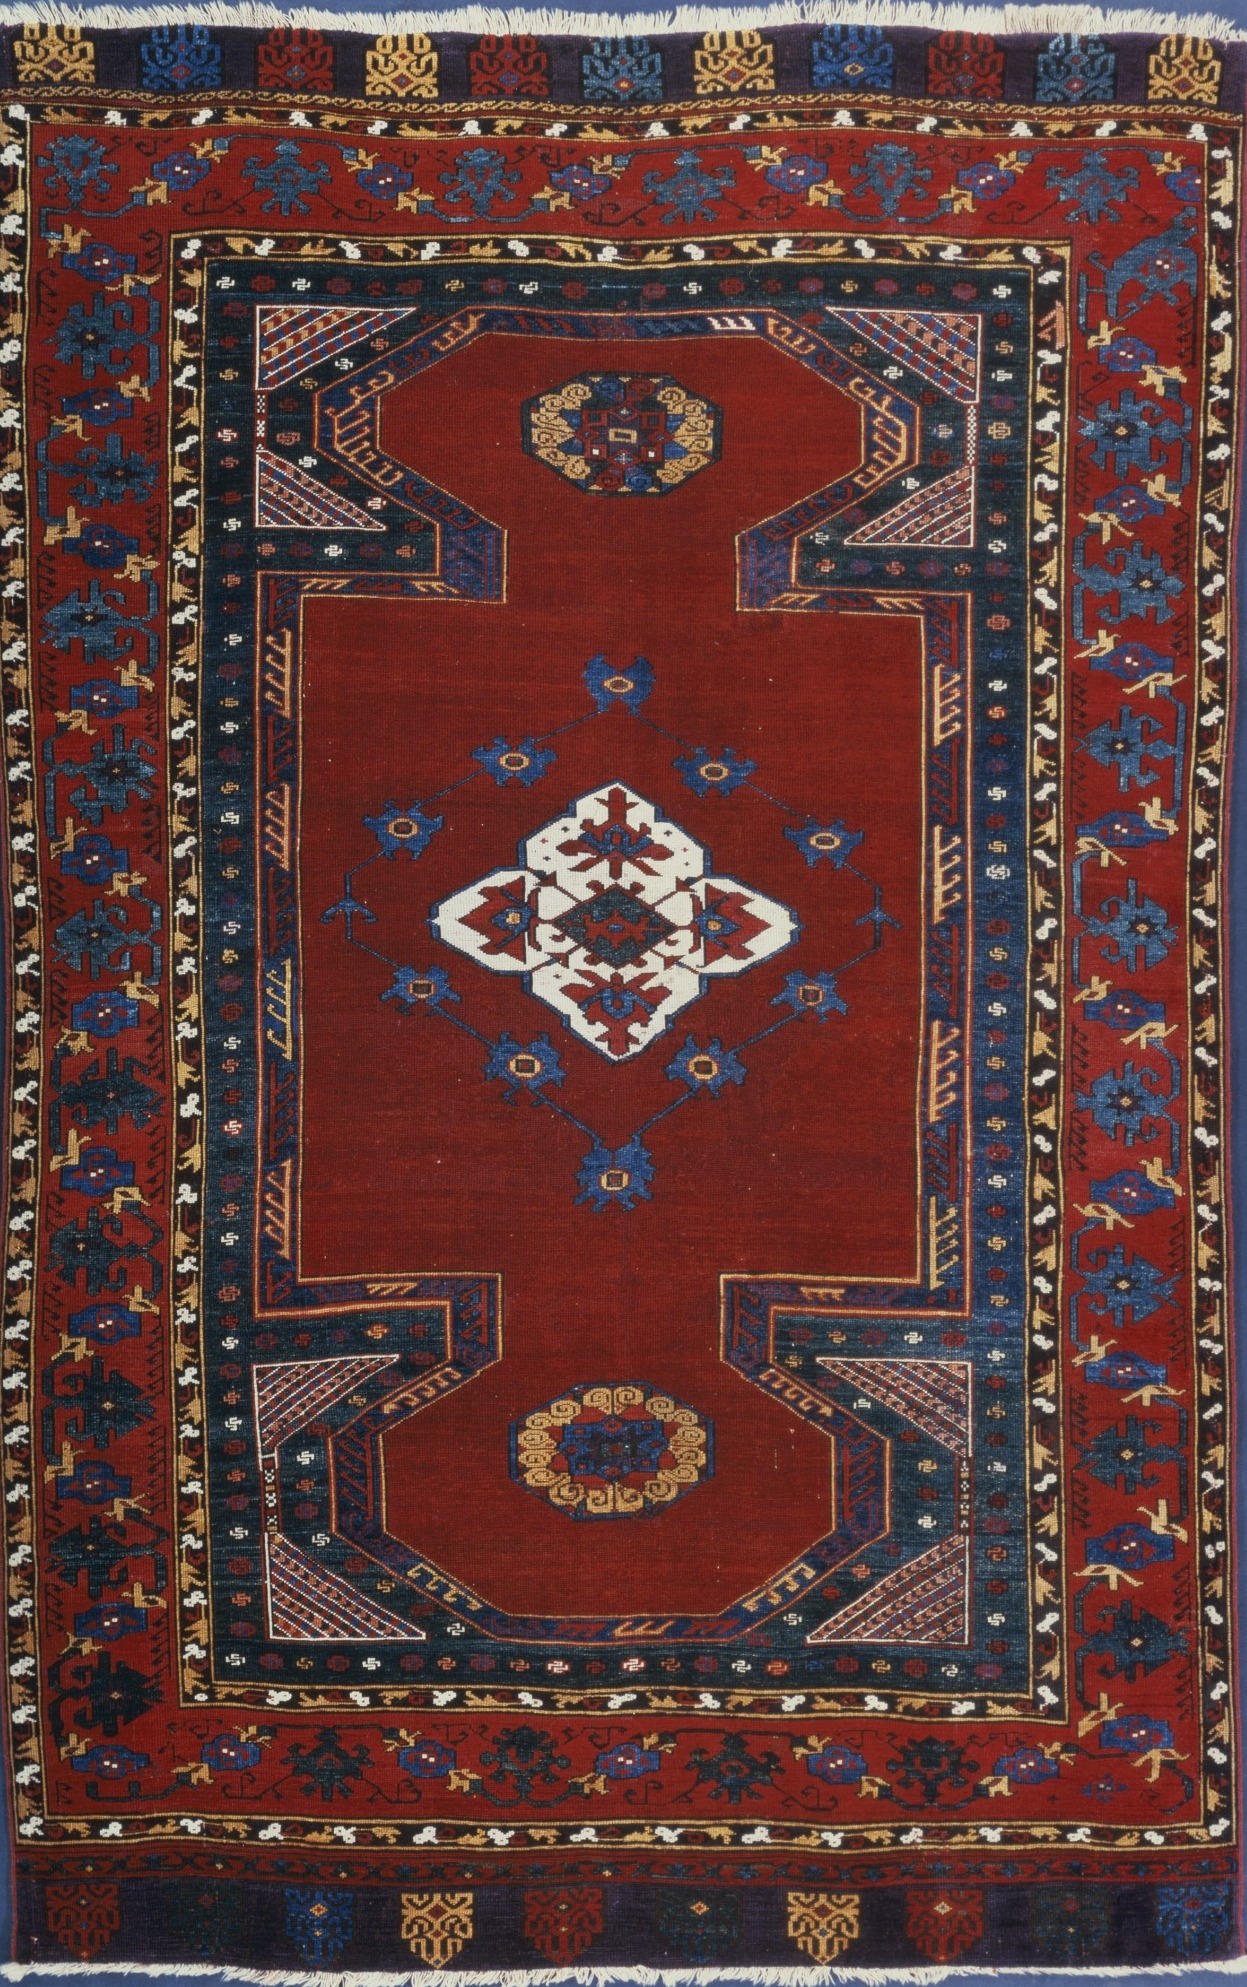 Anatolian Rug Wikipedia, What Is The Most Durable Rug Material In World